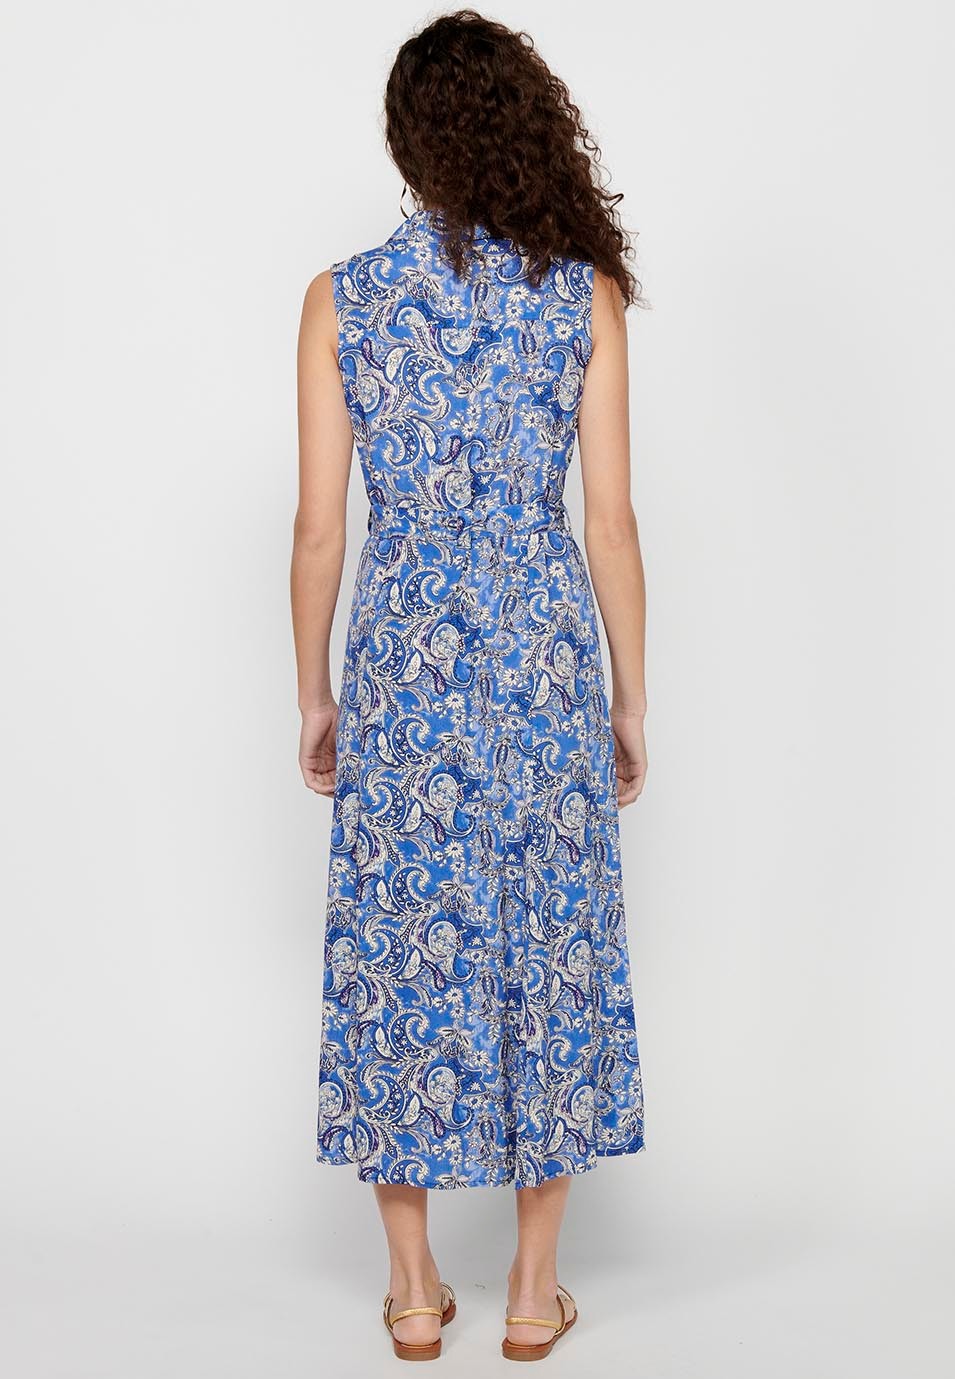 Long short-sleeved dress with floral print and front closure with buttons from the waist in Blue for Women 7